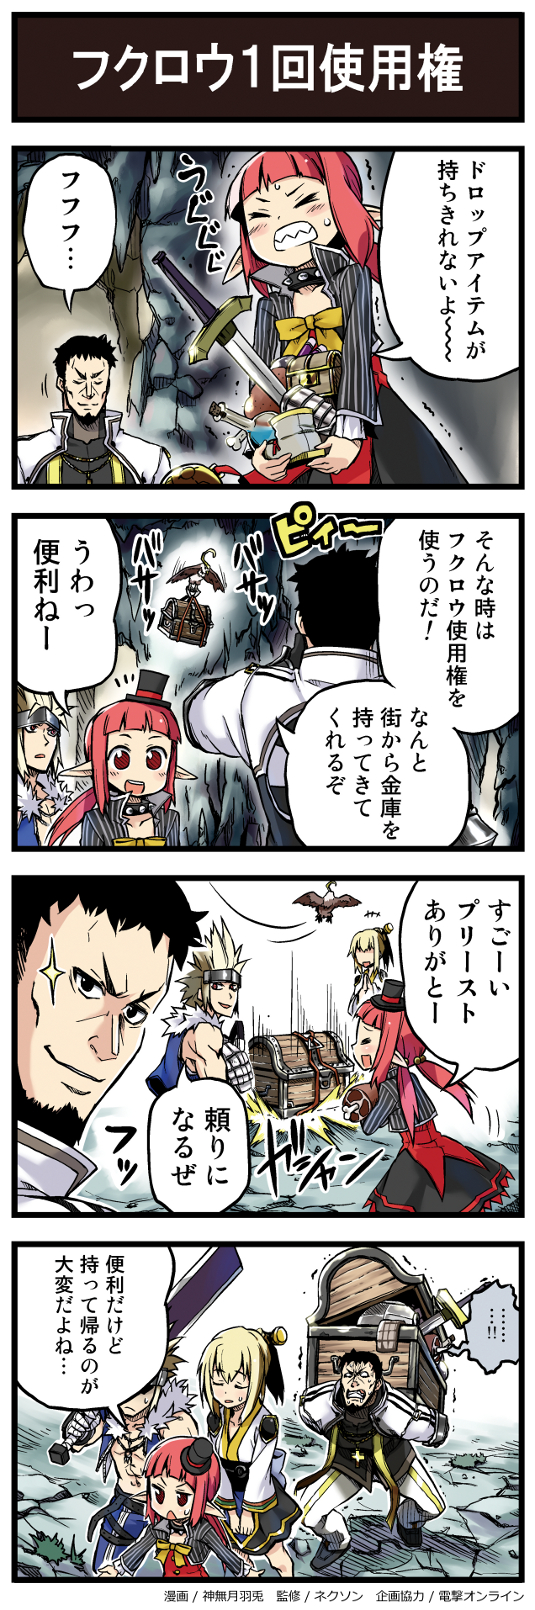 ... 2boys 2girls 4koma :d animal beard bird black_hair blonde_hair bococho check_translation closed_eyes comic dungeon_and_fighter facial_hair female_gunner_(dungeon_and_fighter) gameplay_mechanics hat highres kannazuki_hato mage_(dungeon_and_fighter) mini_hat mini_top_hat motion_lines multiple_boys multiple_girls official_art open_mouth owl pointy_ears potion priest_(dungeon_and_fighter) red_eyes red_hair slayer_(dungeon_and_fighter) smile spoken_ellipsis sword top_hat translation_request treasure_chest weapon